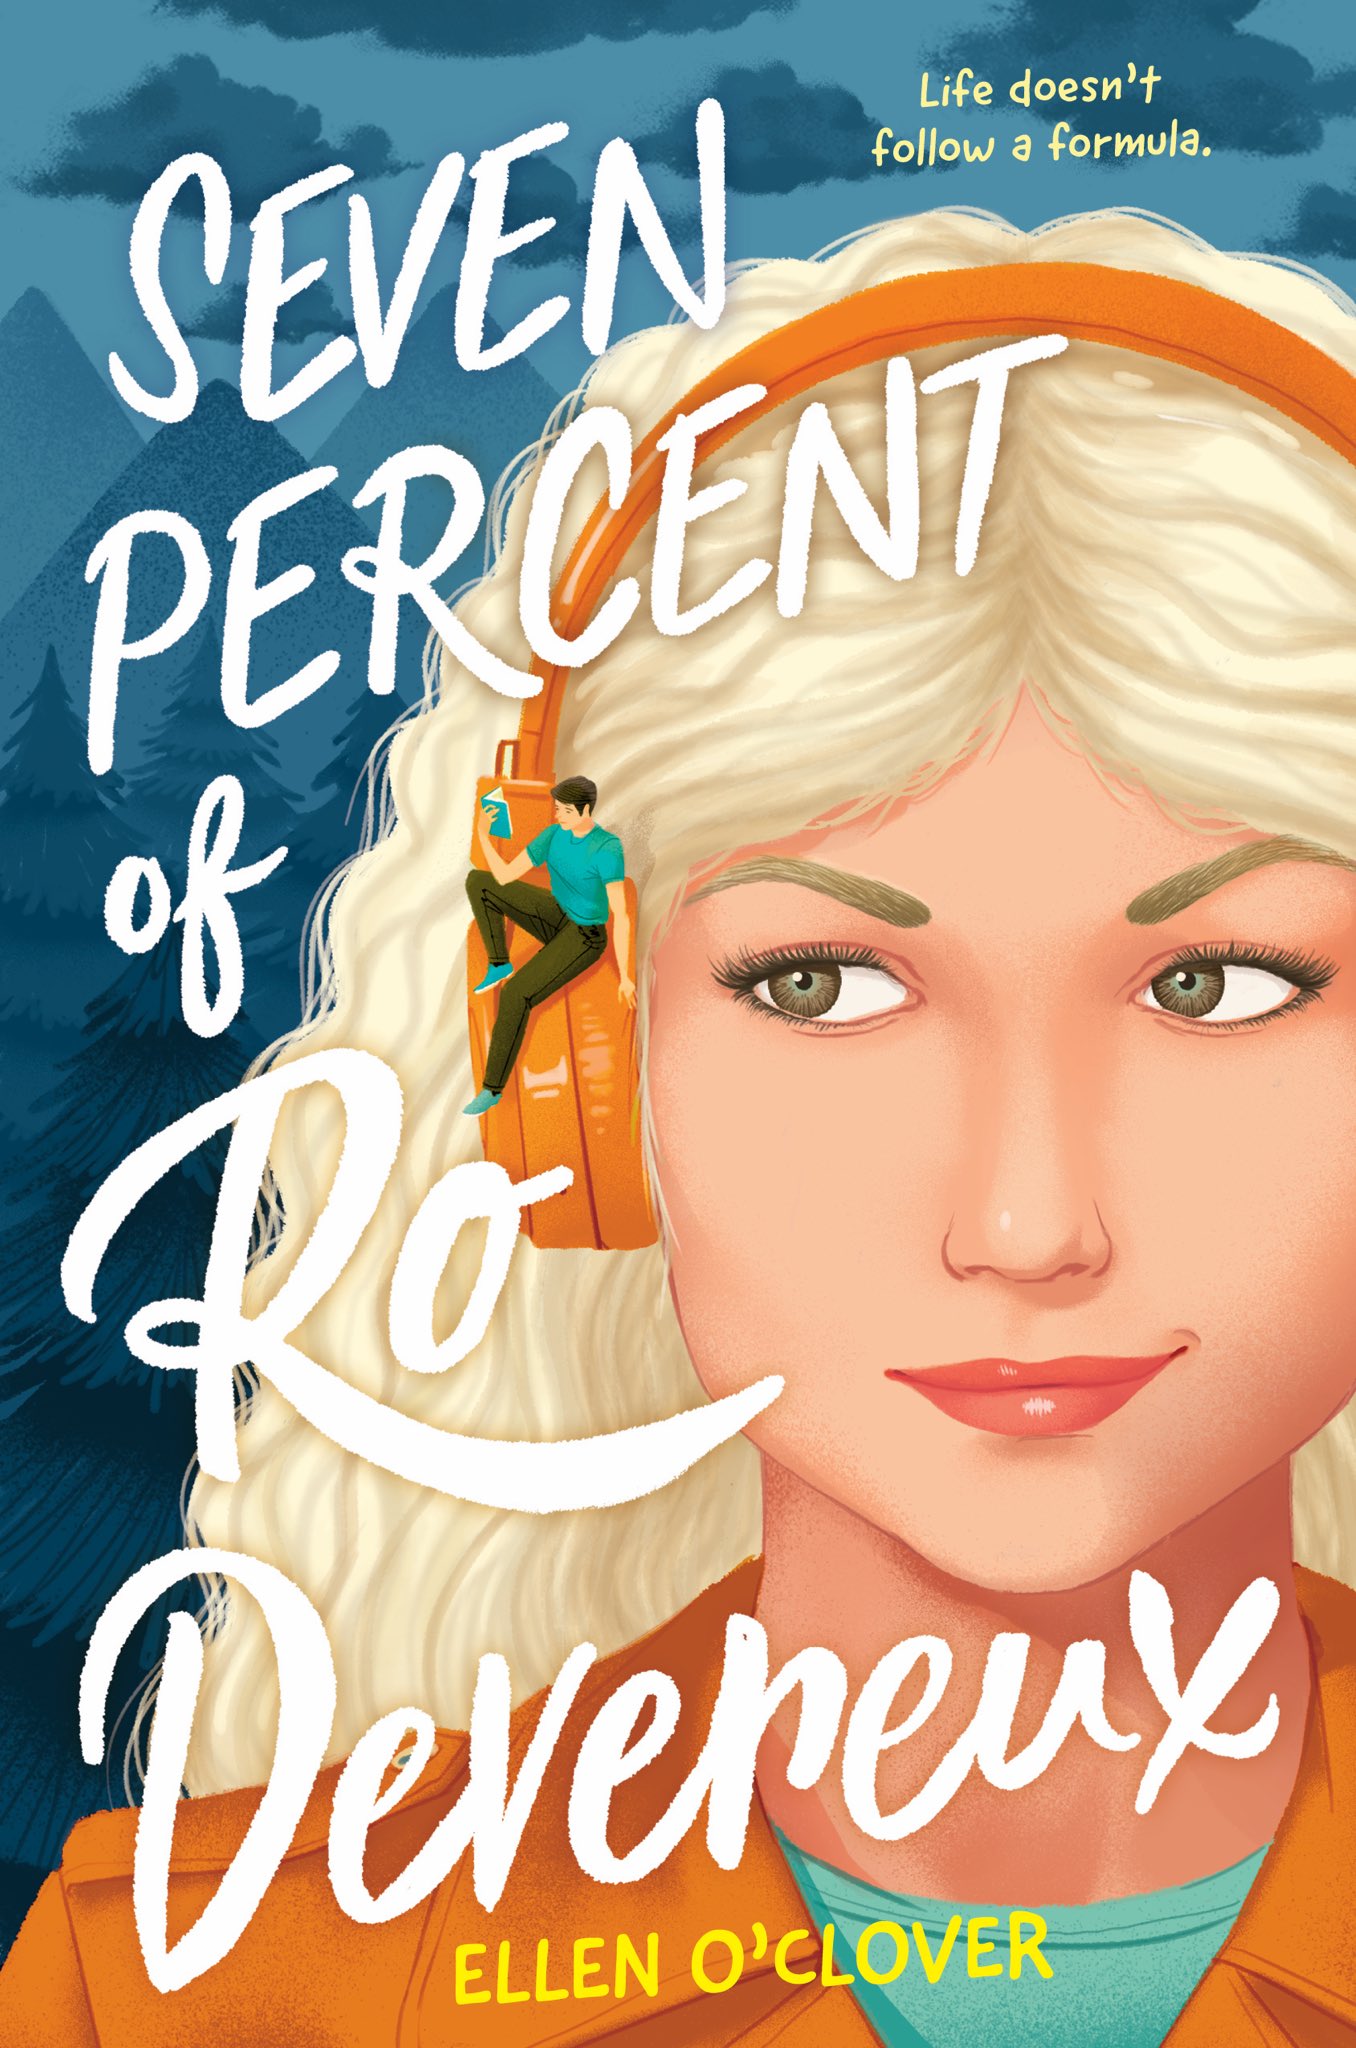 Cover of Seven Percent of Ro Devereux. A blonde white girl in headphones glances at a tiny boy on one of her earpieces.